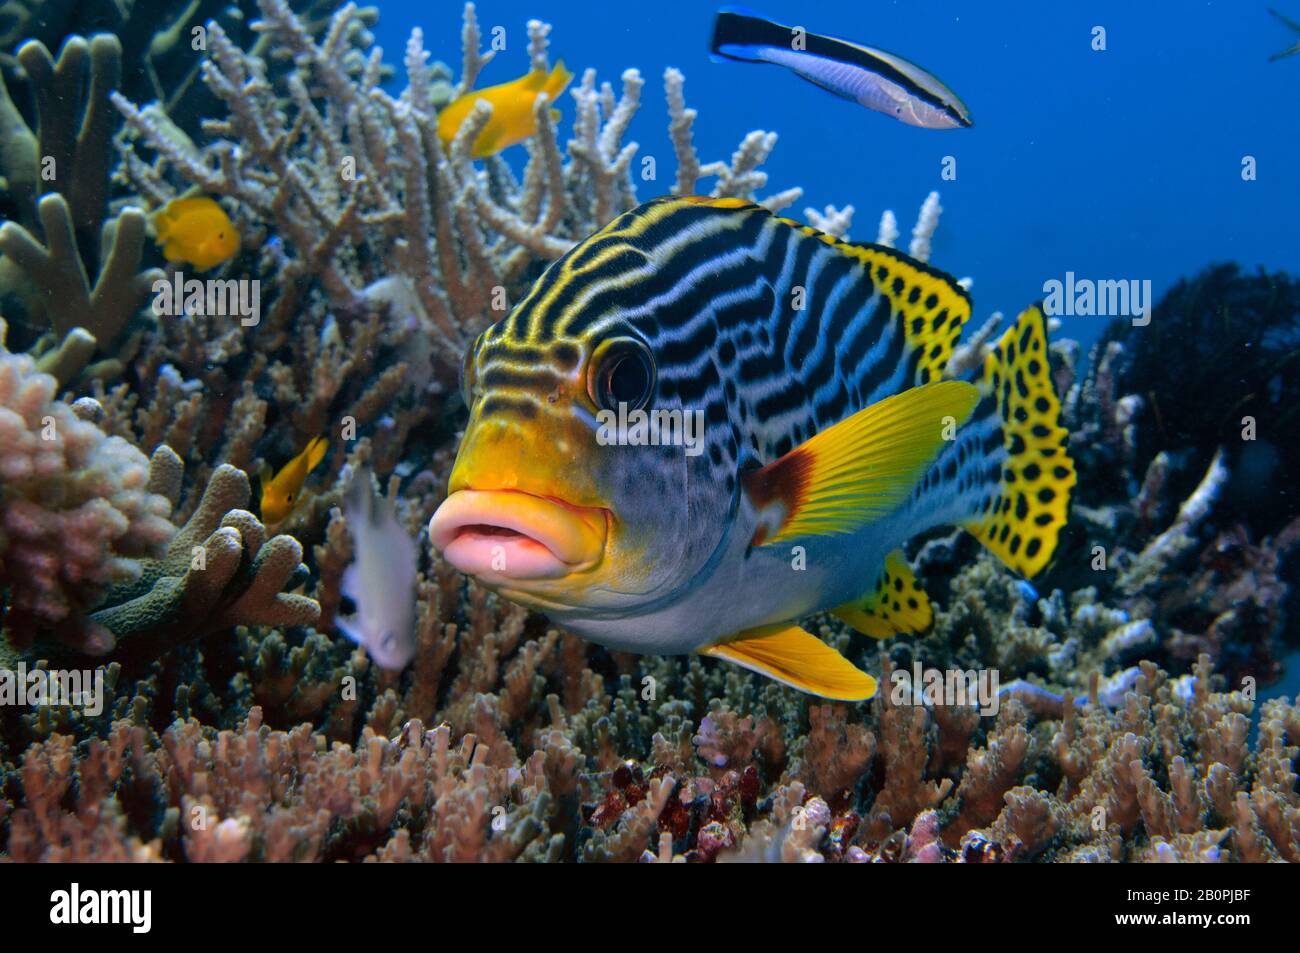 Yellowbanded sweetlips, Plectorhinchus lineata, and a bluestreak cleaner wrasse, Labroides dimidiatus, Komodo National Park, Indonesia Stock Photo